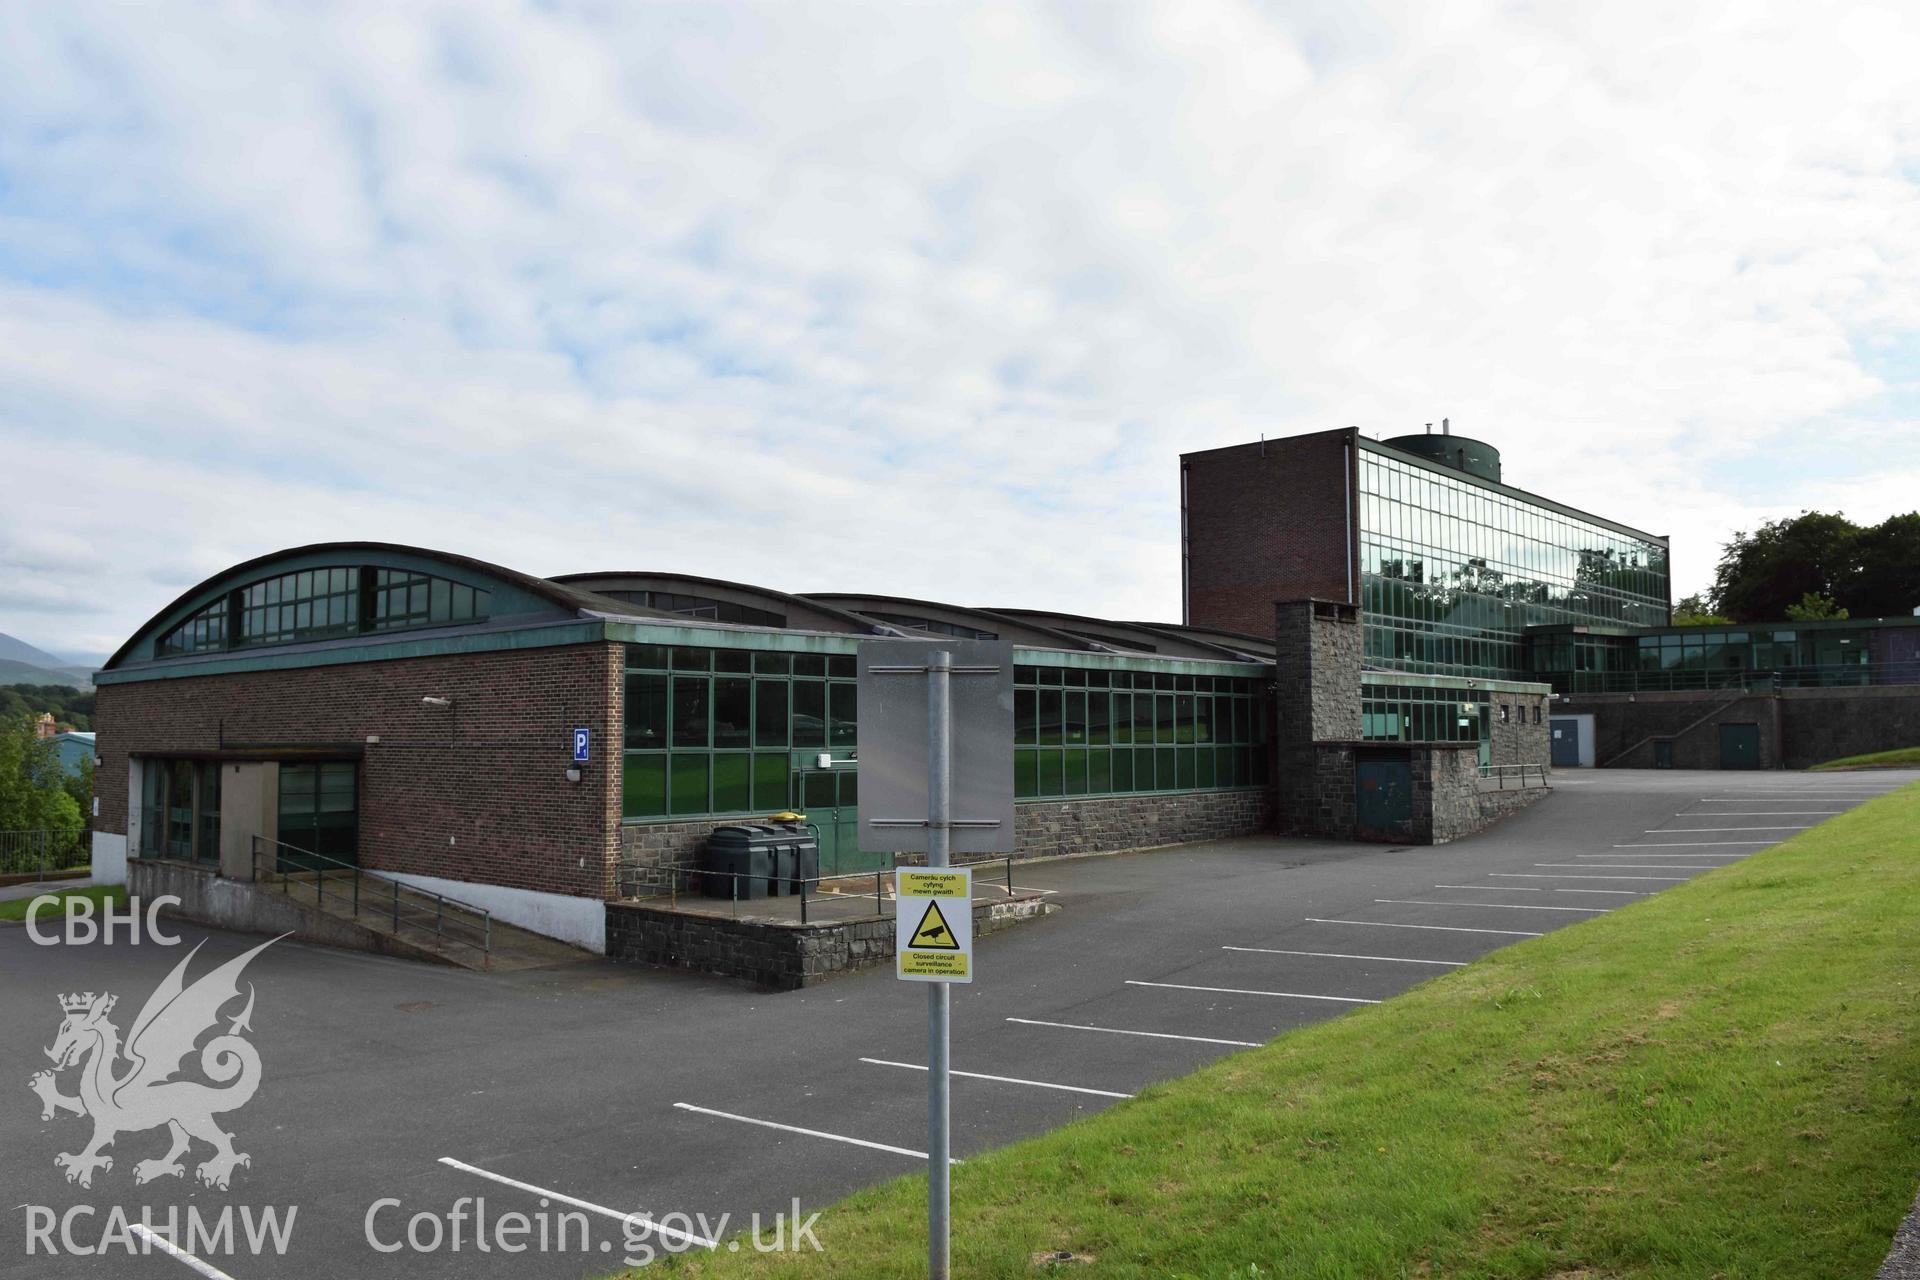 Digital colour photograph showing Caernarfonshire Technical College from the north-east, taken by Susan Fielding of RCAHMW 7 May 2019.